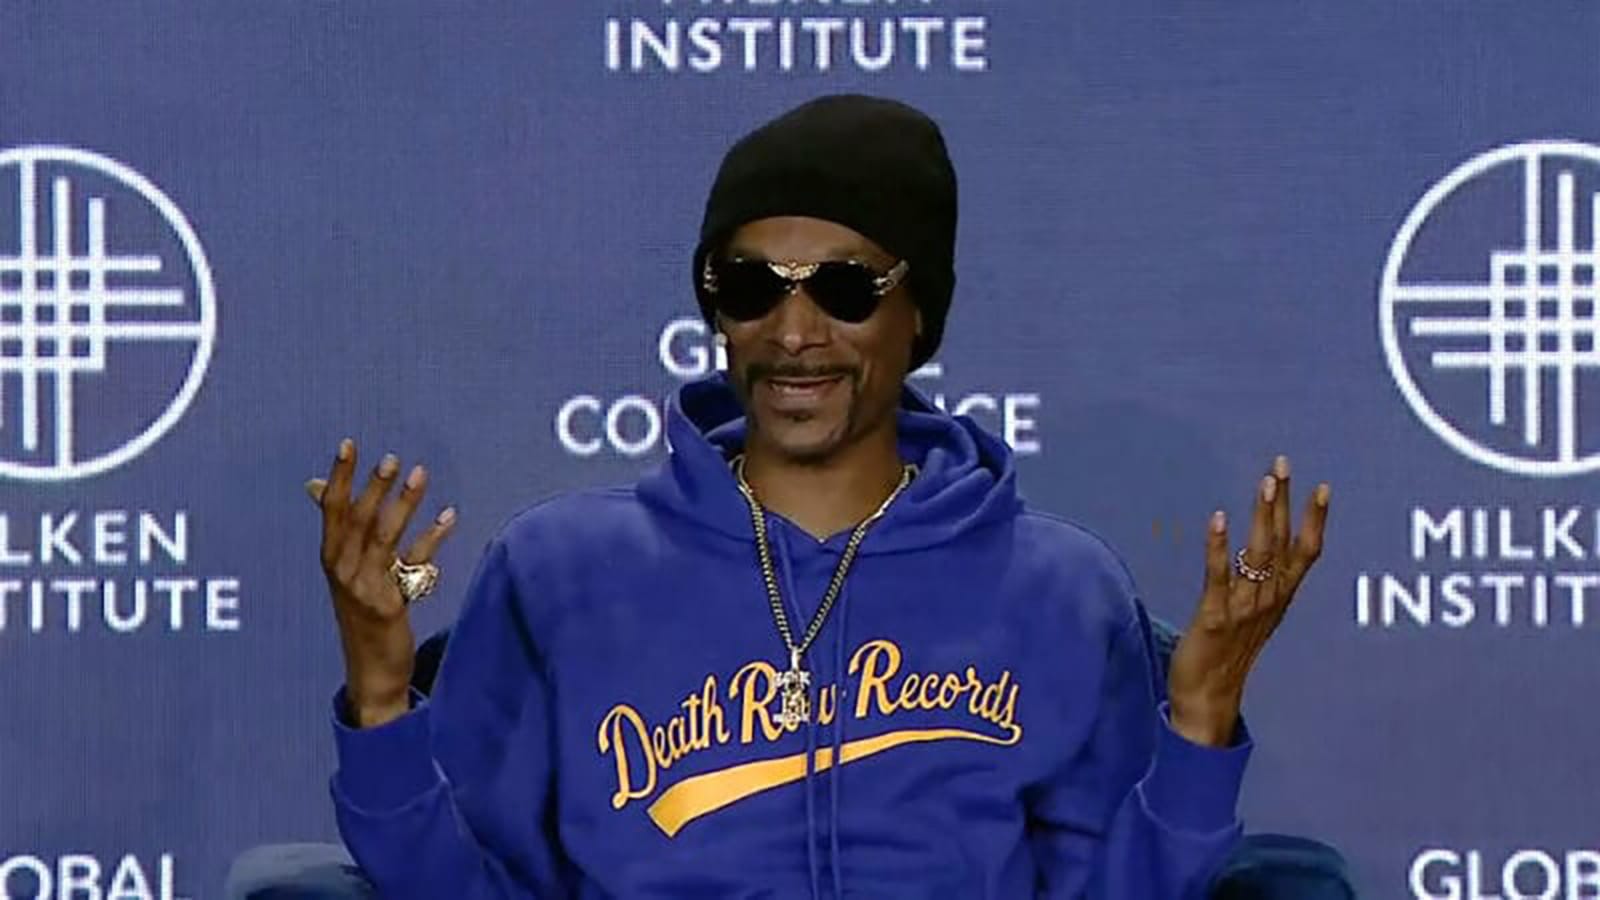 Snoop Dogg shares his views on AI at the Milken Institute in 2023.